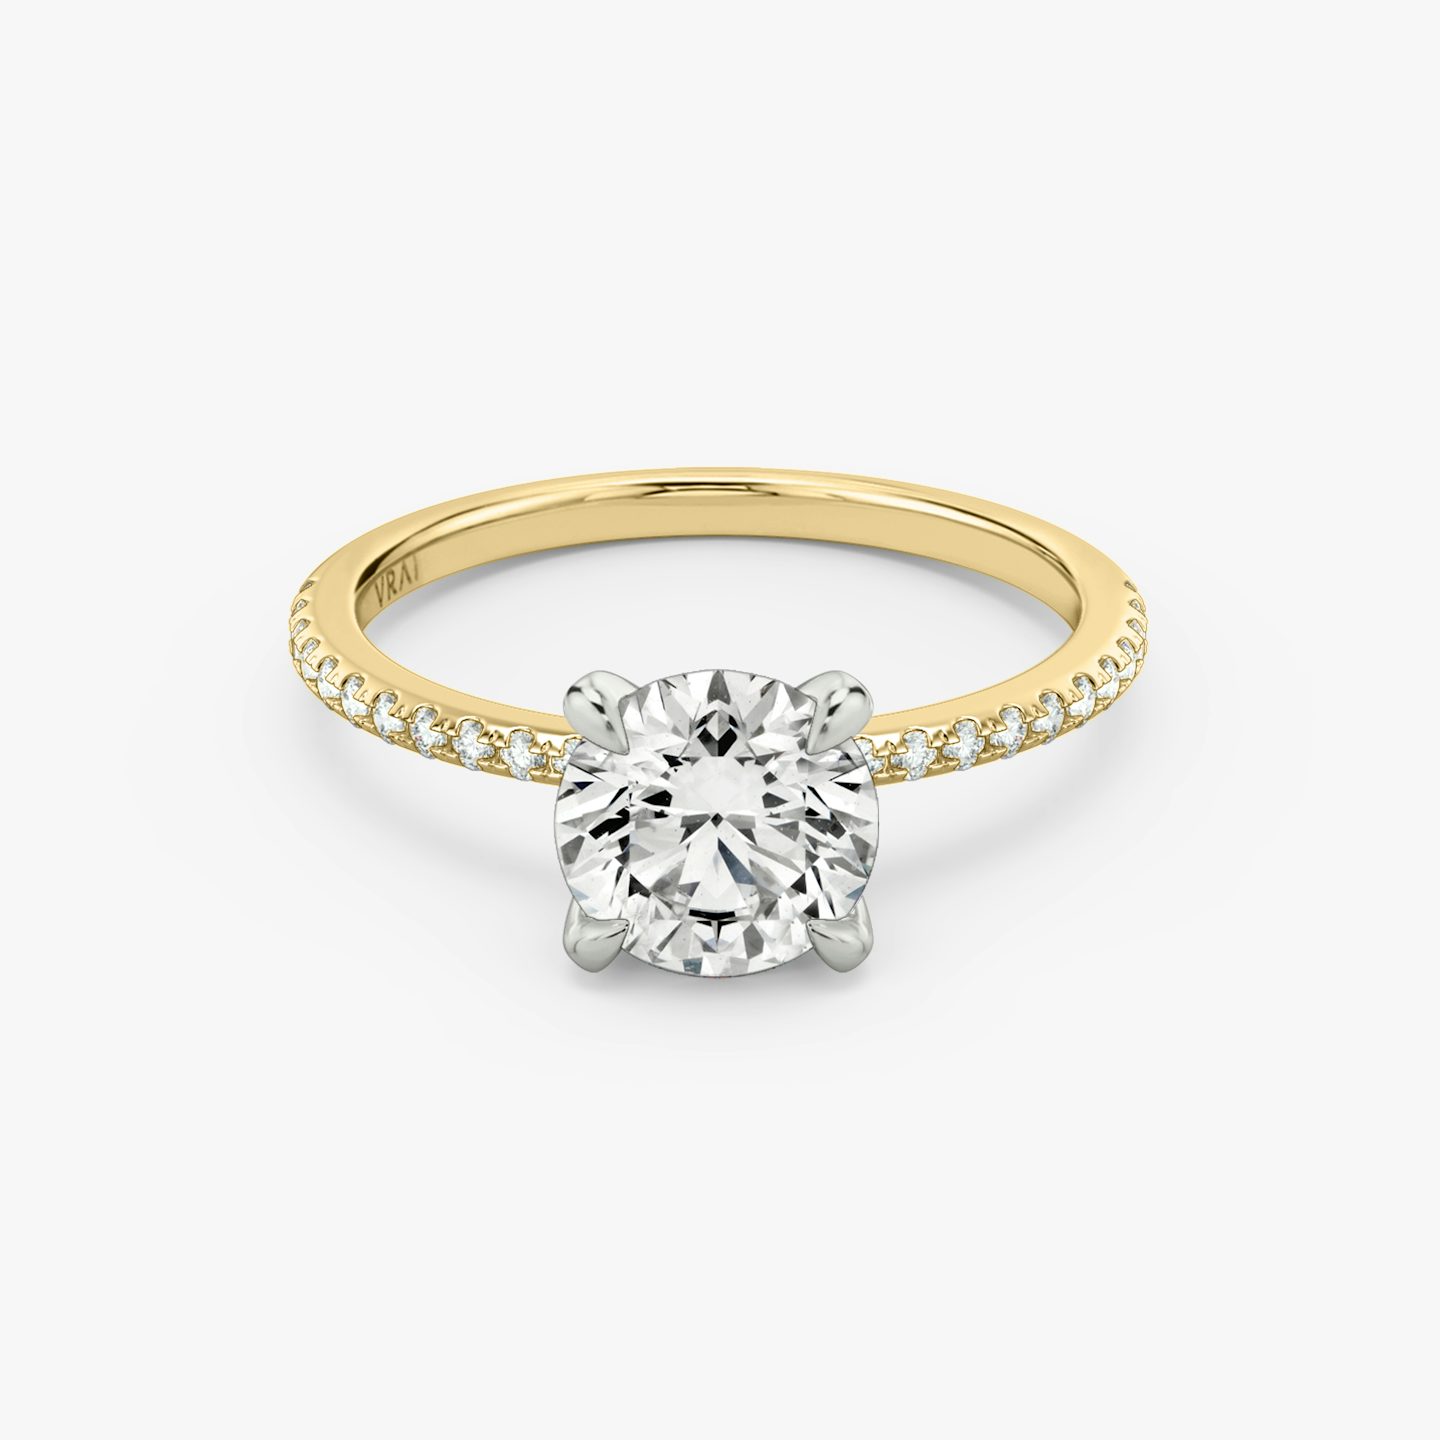 The Classic Two Tone | round-brilliant | 18k | yellow-gold-and-platinum | bandAccent: pave | caratWeight: 1.0ct | diamondOrientation: vertical